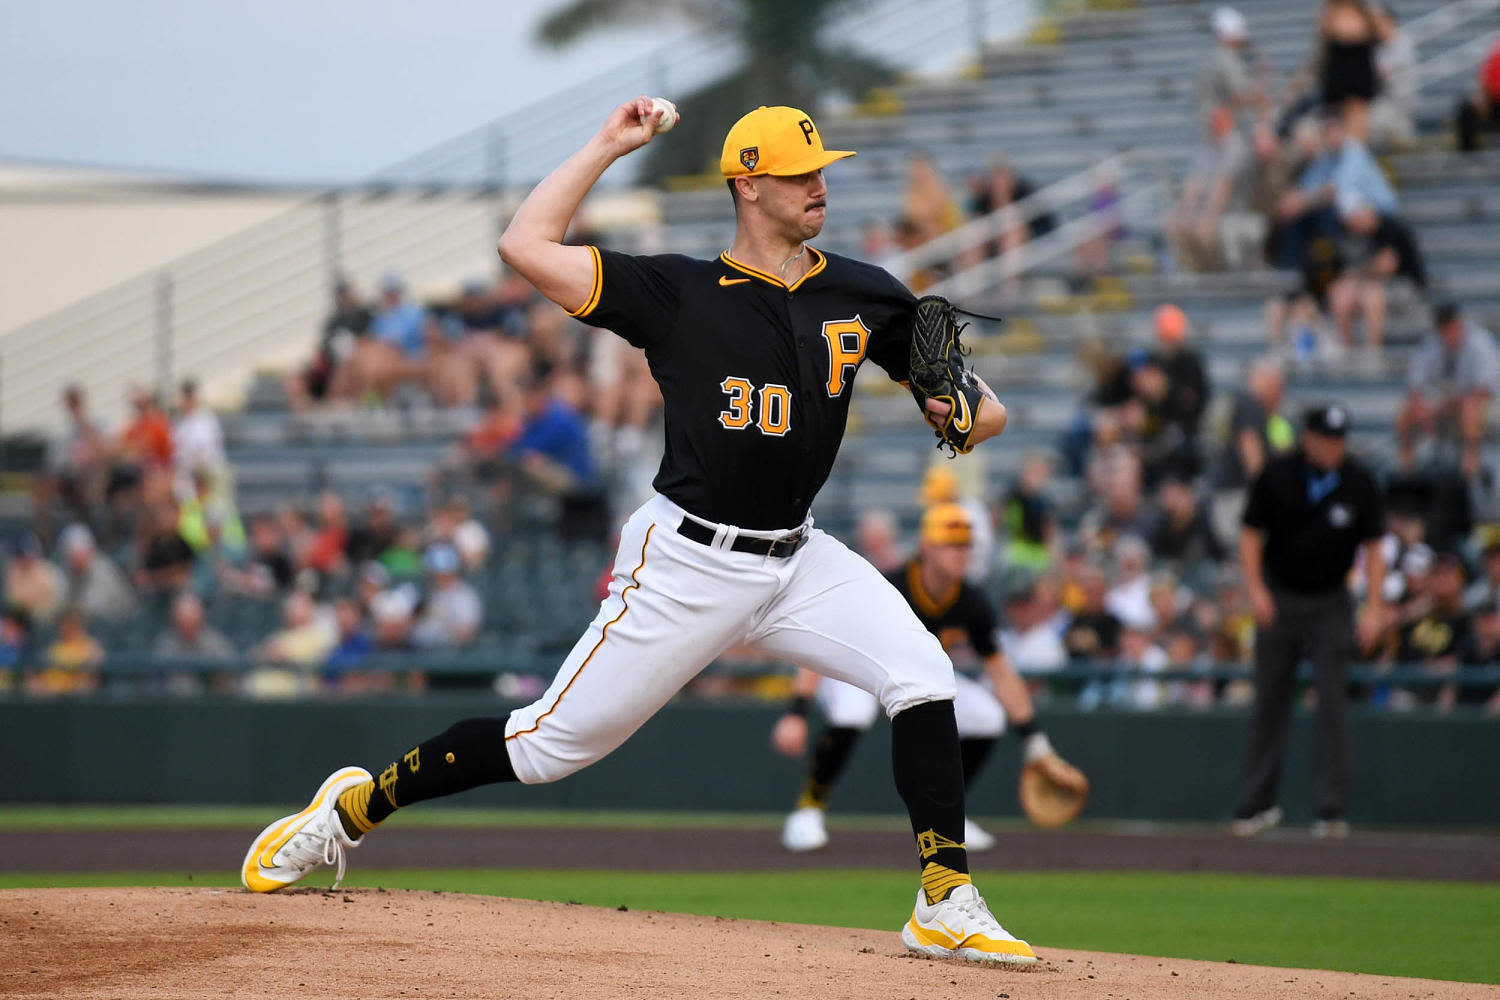 All about Paul Skenes, the hard-throwing top baseball prospect who made his MLB debut